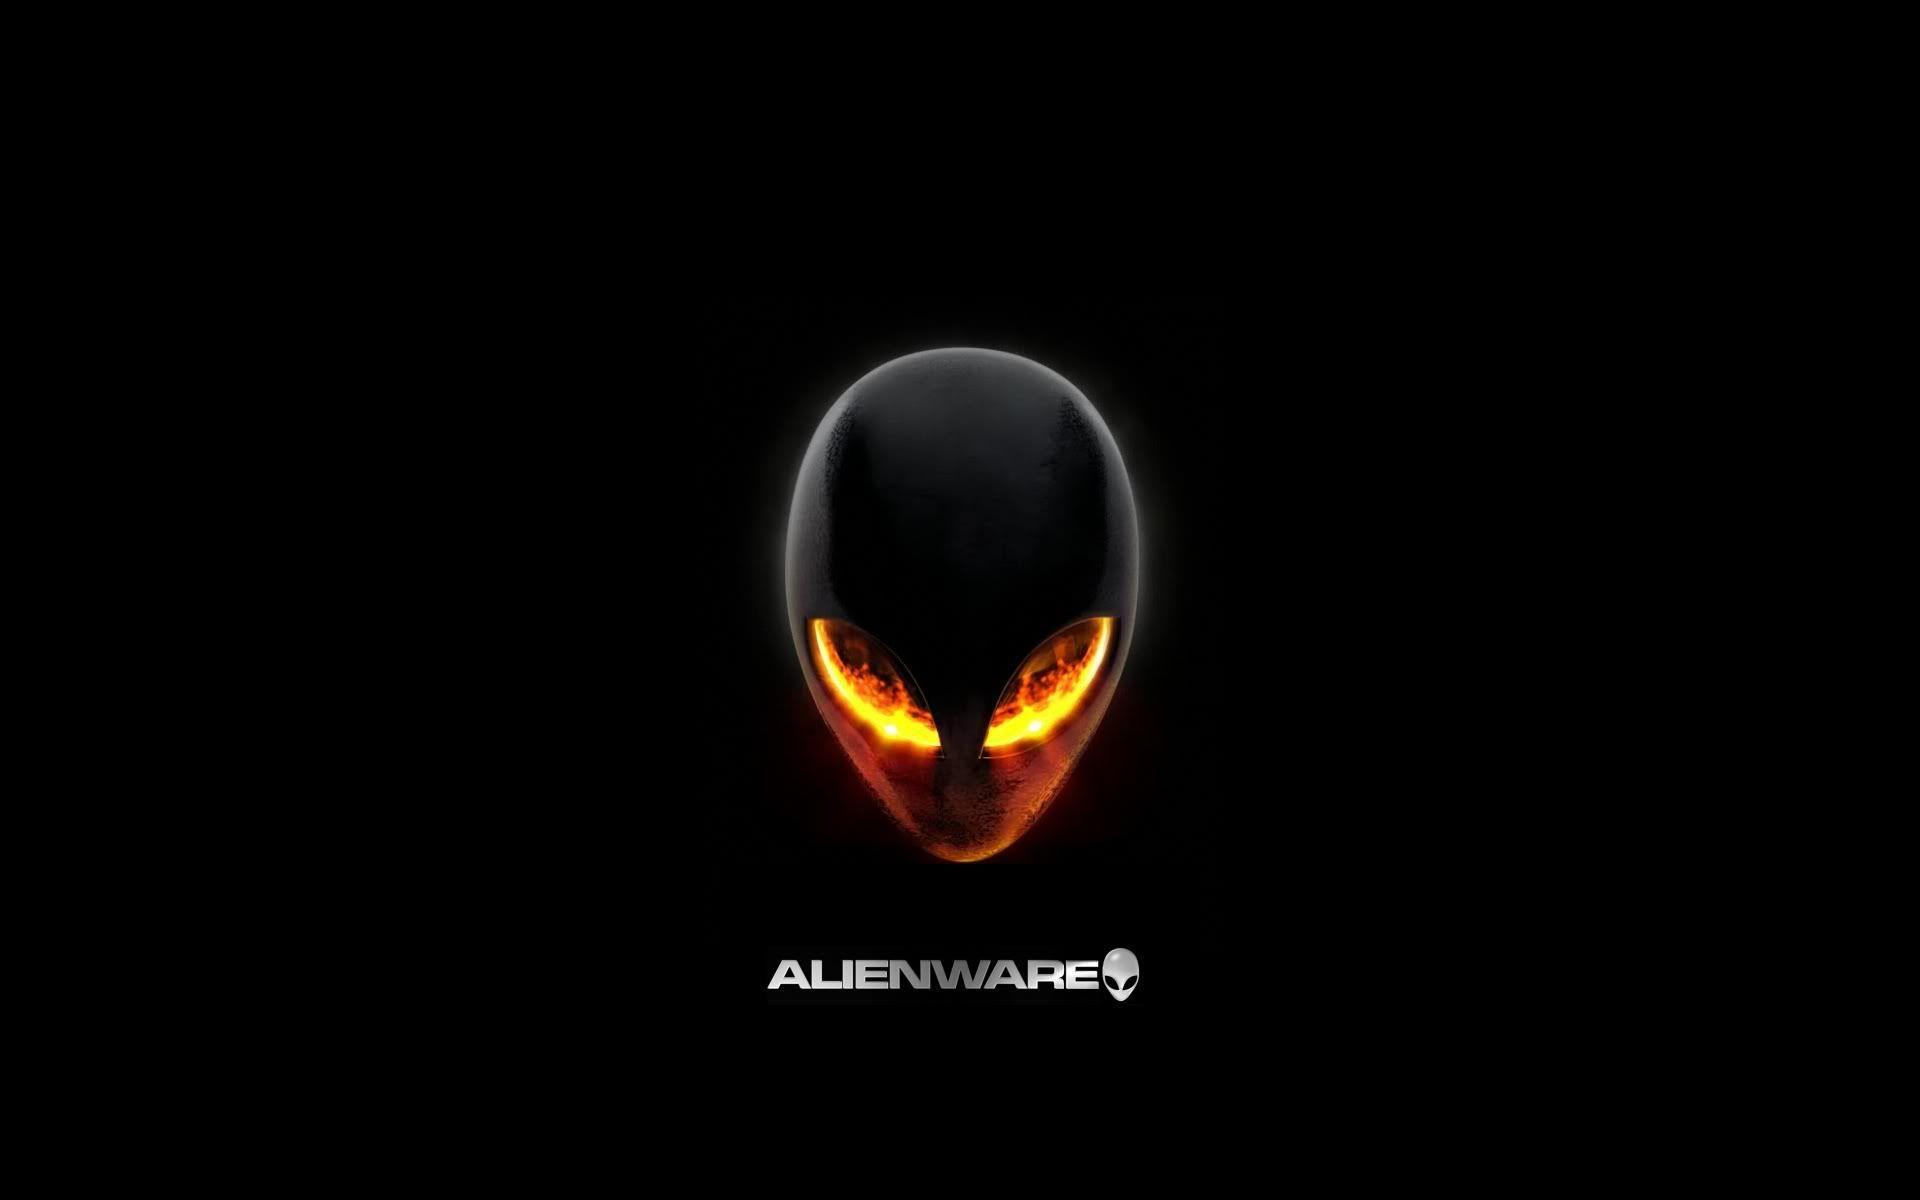 Alienware desktop customization themes and wallpaper collections